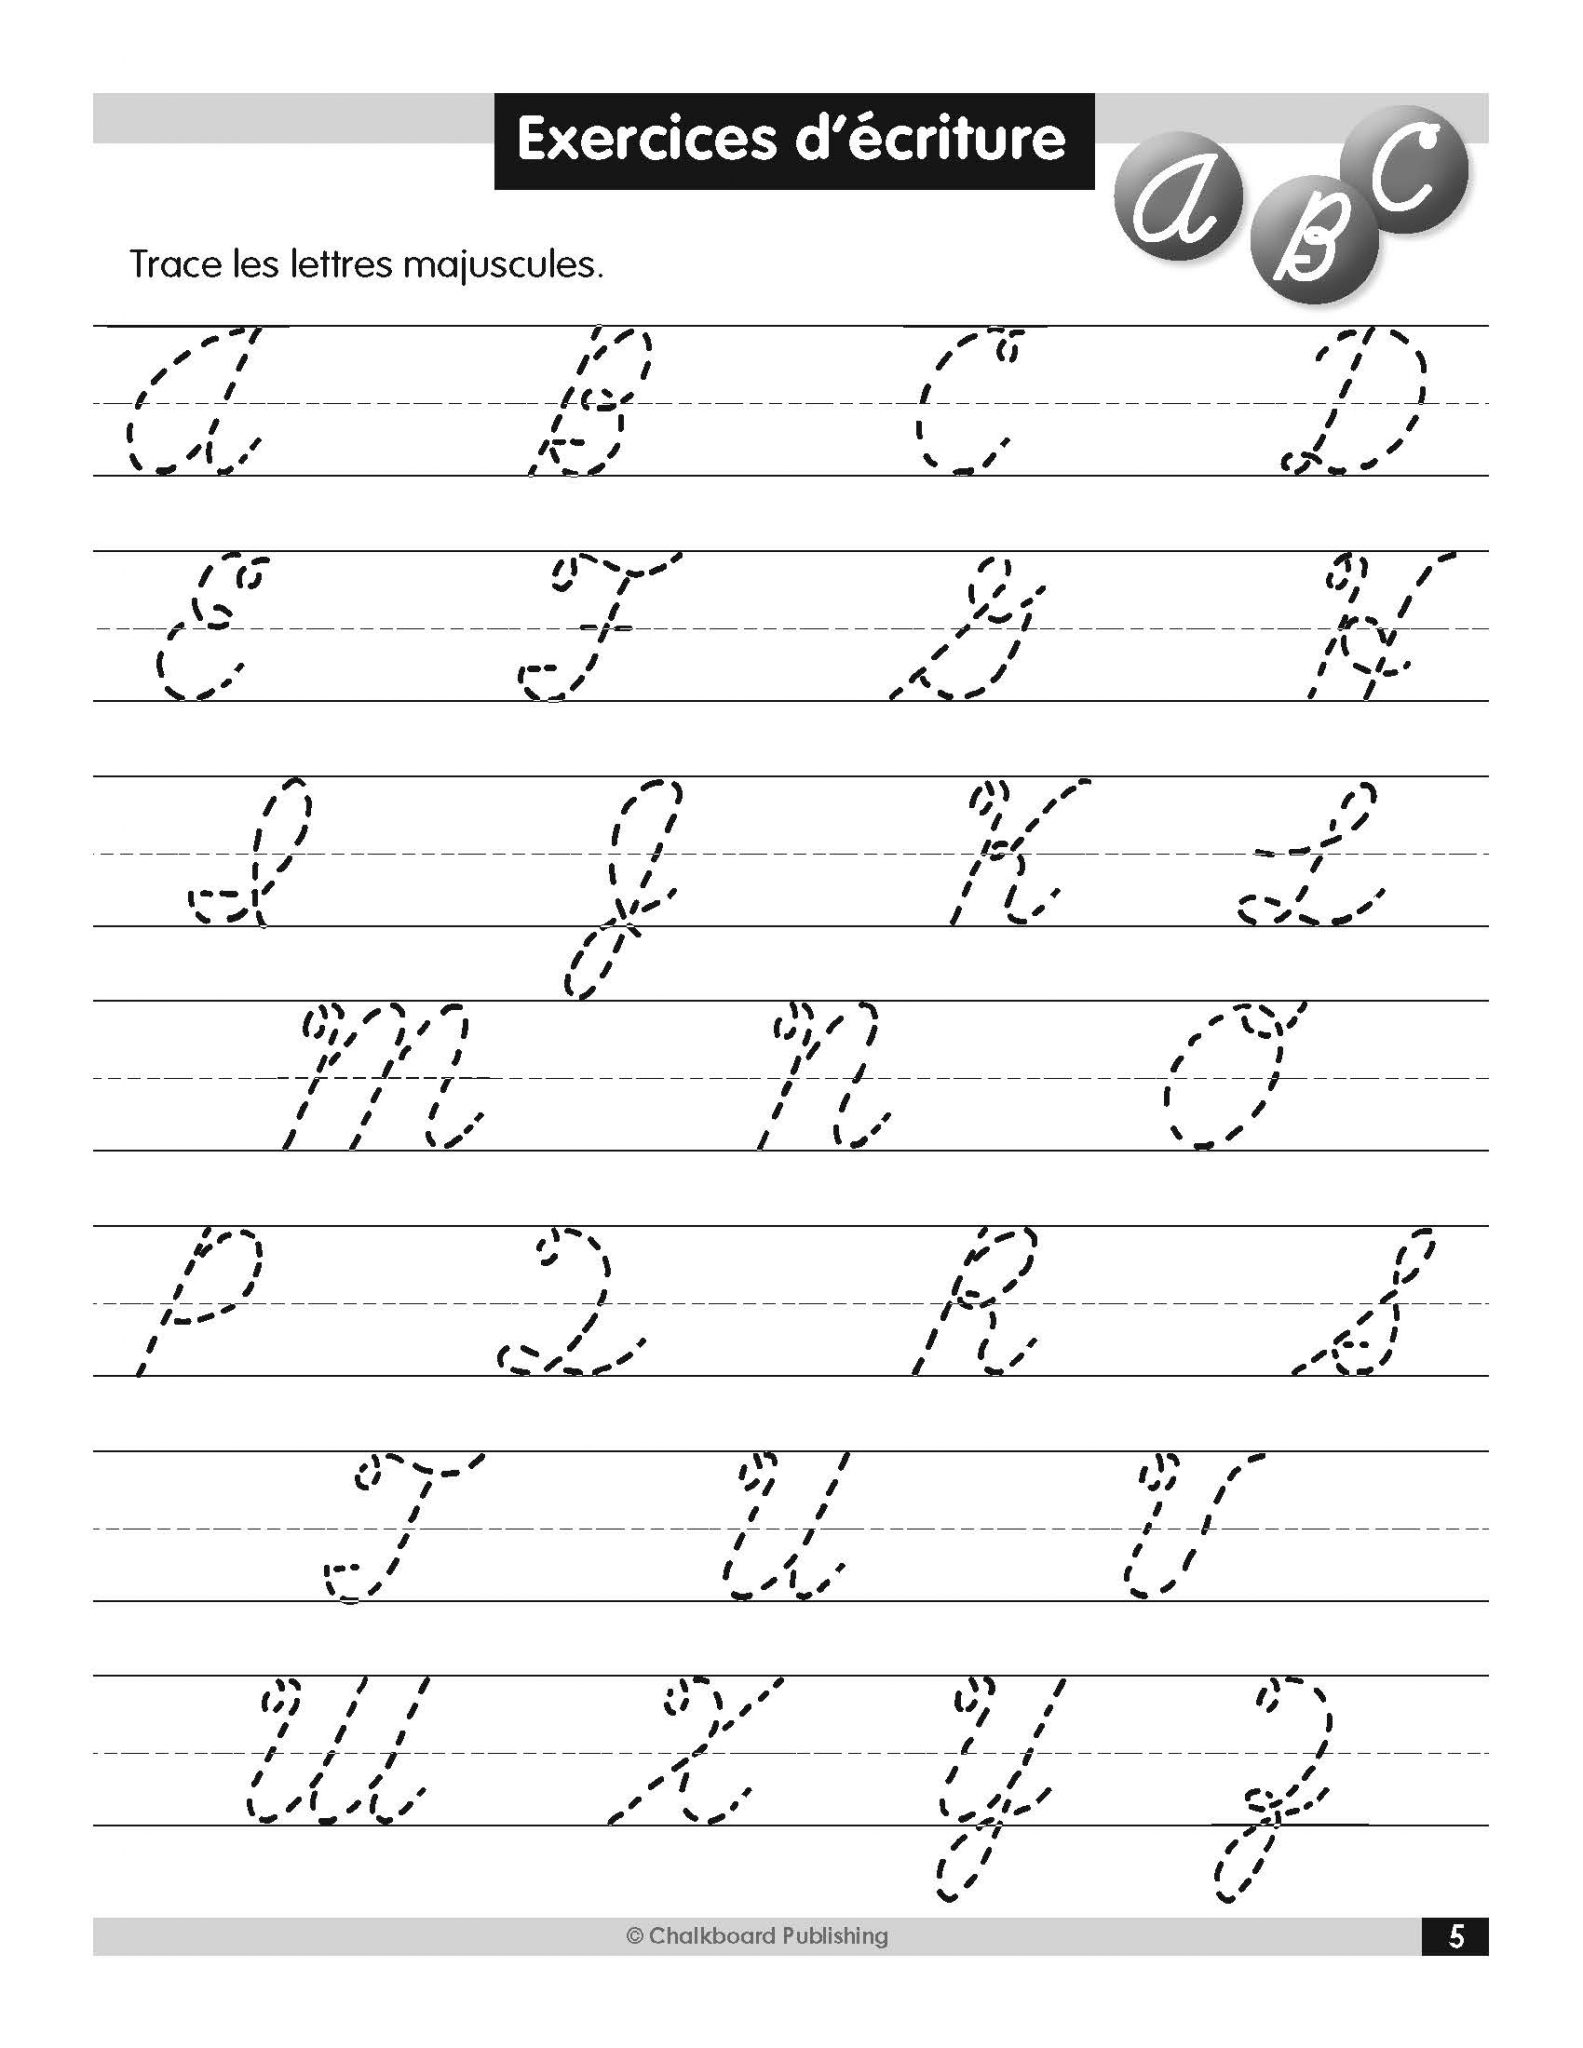 canadian-french-daily-cursive-writing-practice-grades-2-4-ebook-chalkboard-publishing